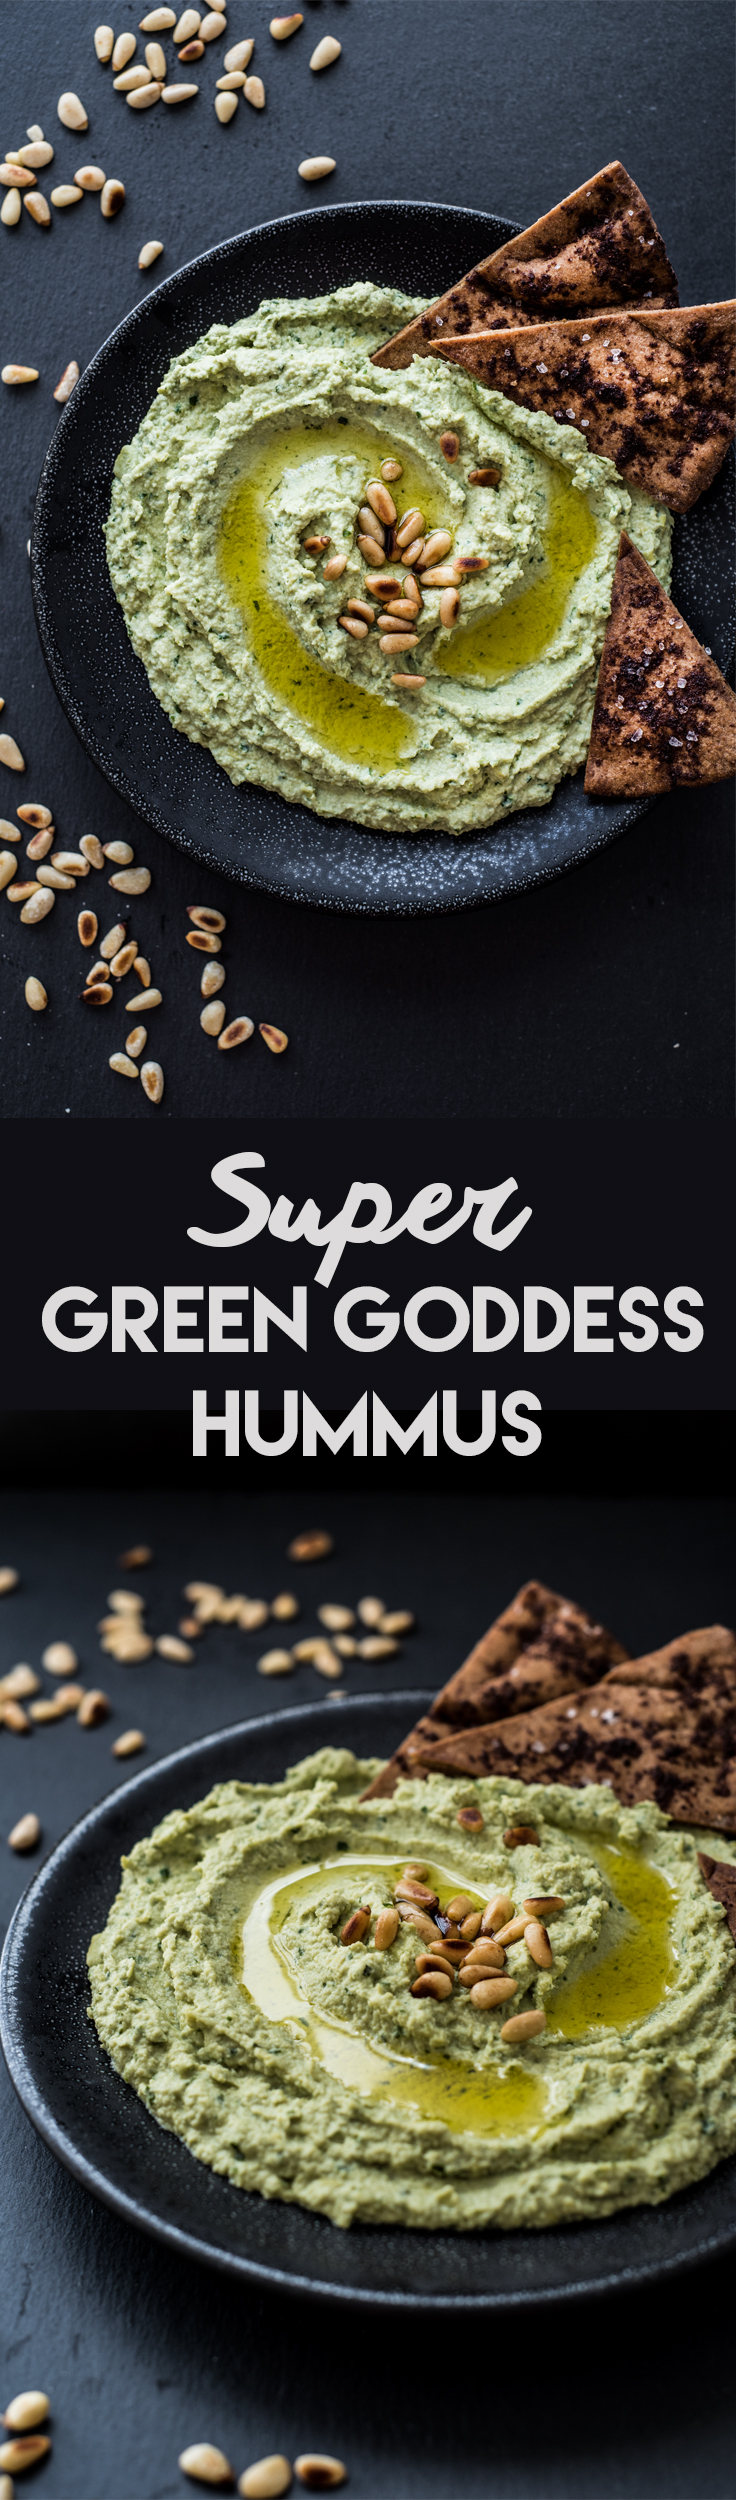 Feel good about snacking with this Super Green Goddess Hummus - ultra healthy, super delicious, and so easy to make!